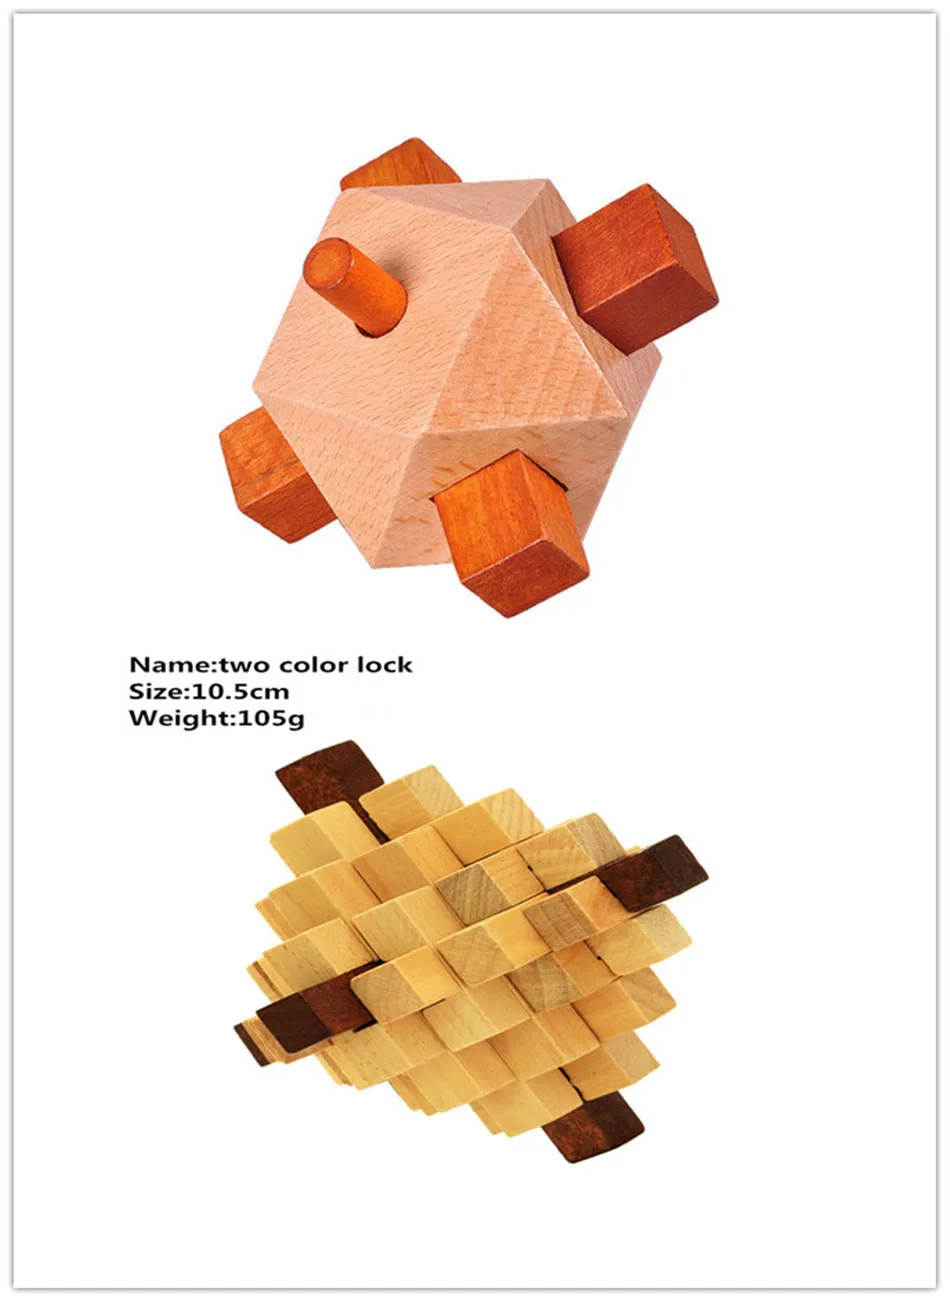 

3D Wooden Puzzles Classical Intellectual Woodens Cube Educational Toy Set Kong Ming Lock IQ Game For Adult Children